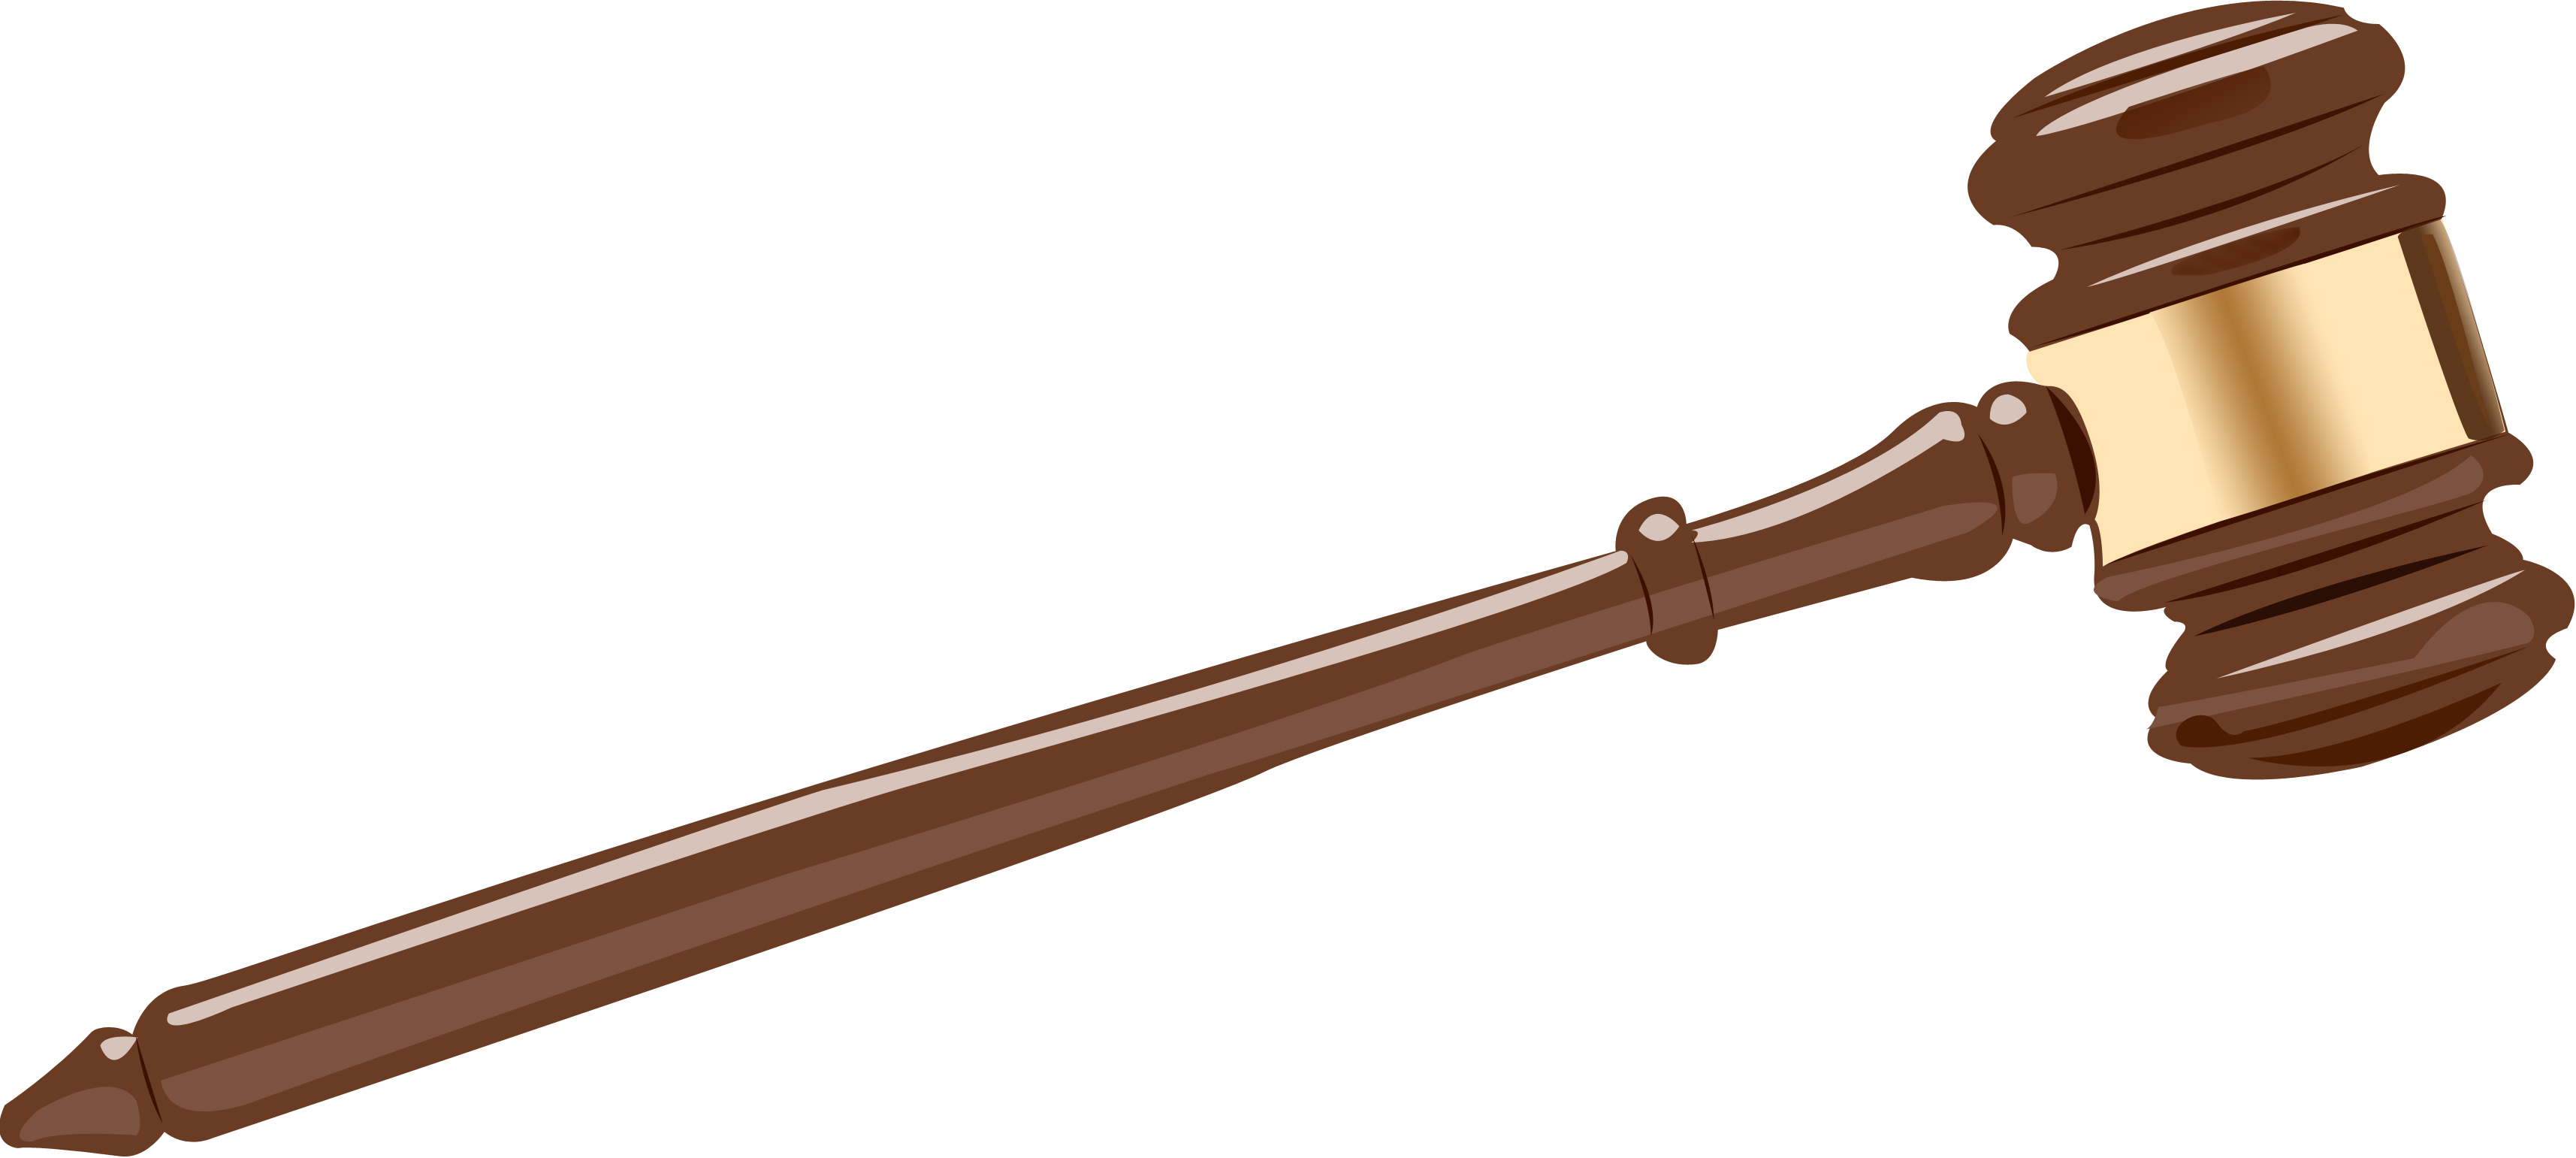 Gavel Clipart to Download - dbclipart.com